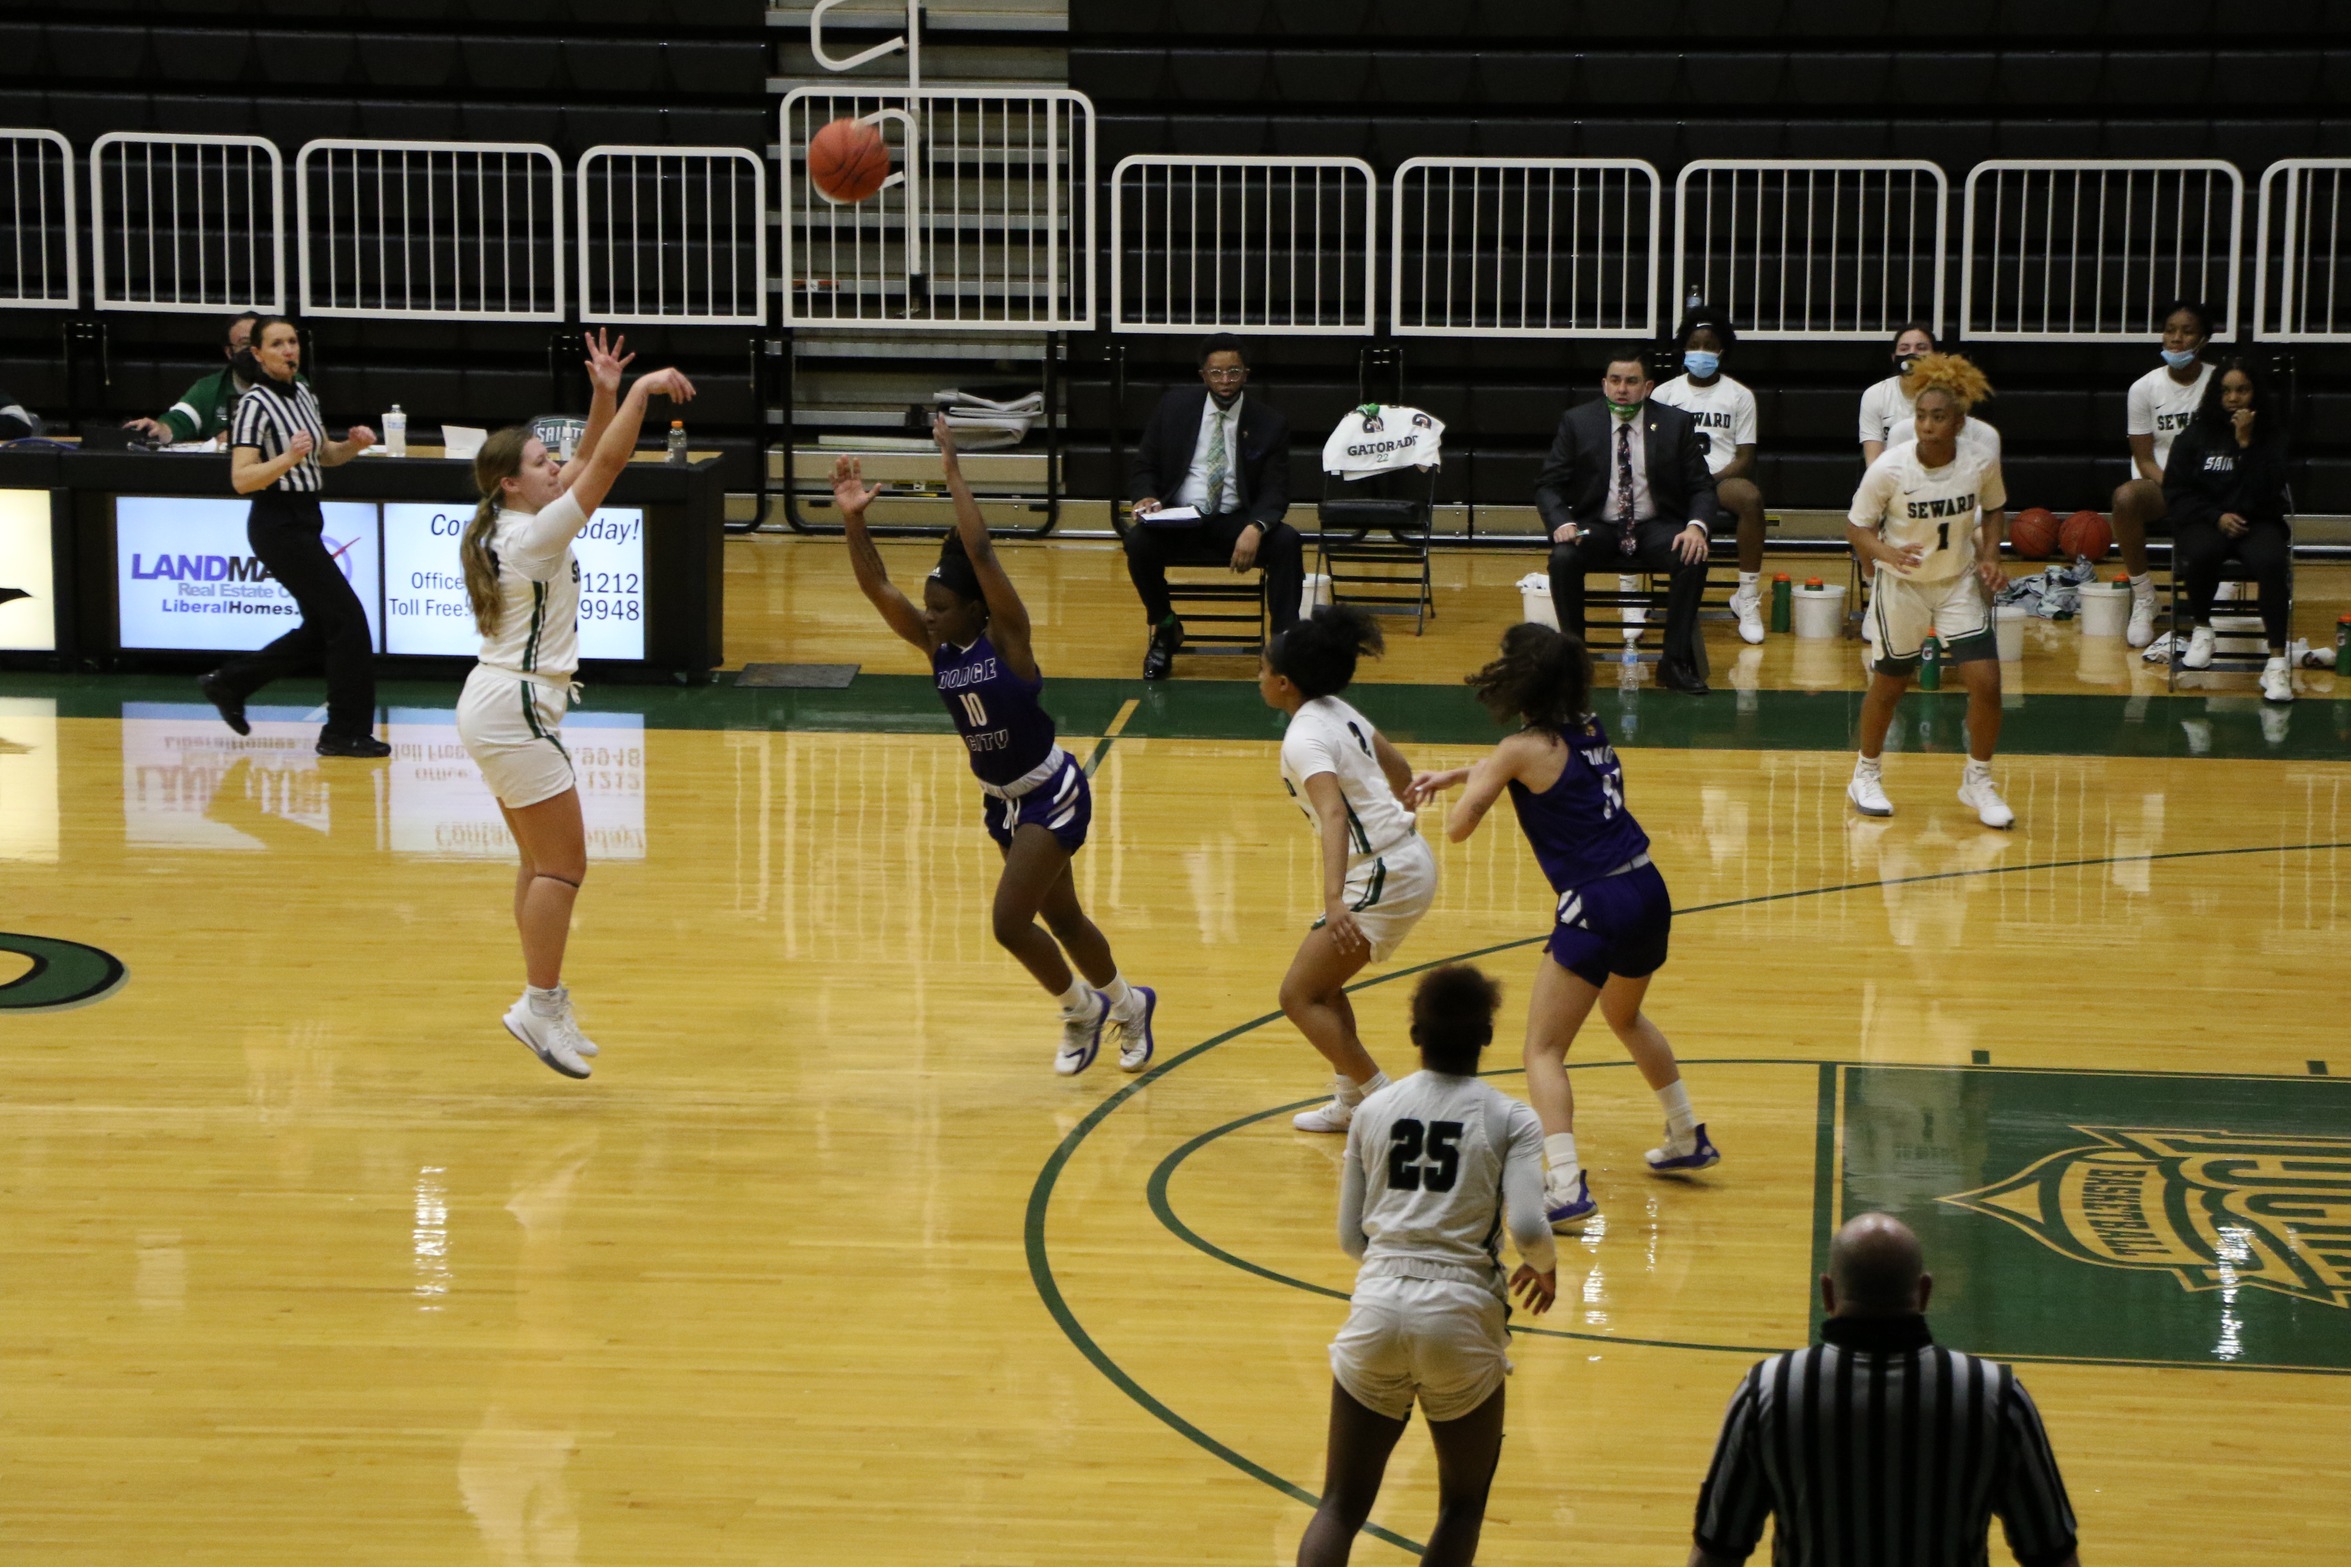 Lady Saints pull ahead and win 67-60 over Dodge City